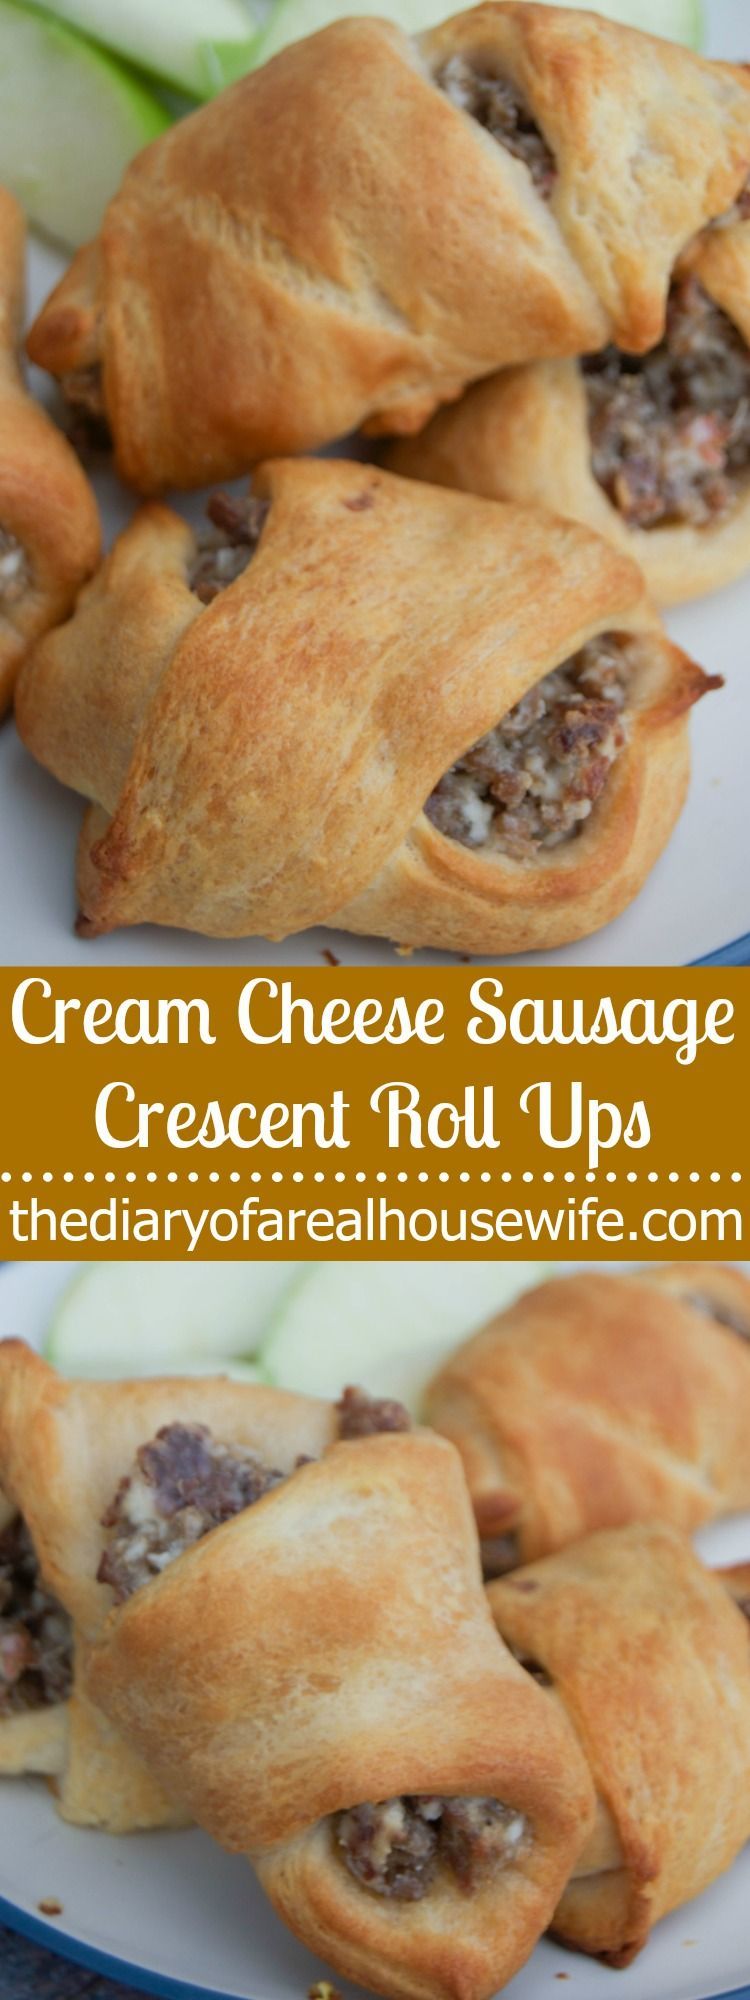 Cream Cheese Sausage Crescent Roll Ups. These Cream Cheese Sausage Crescent Roll Ups are so simple to make and one of my